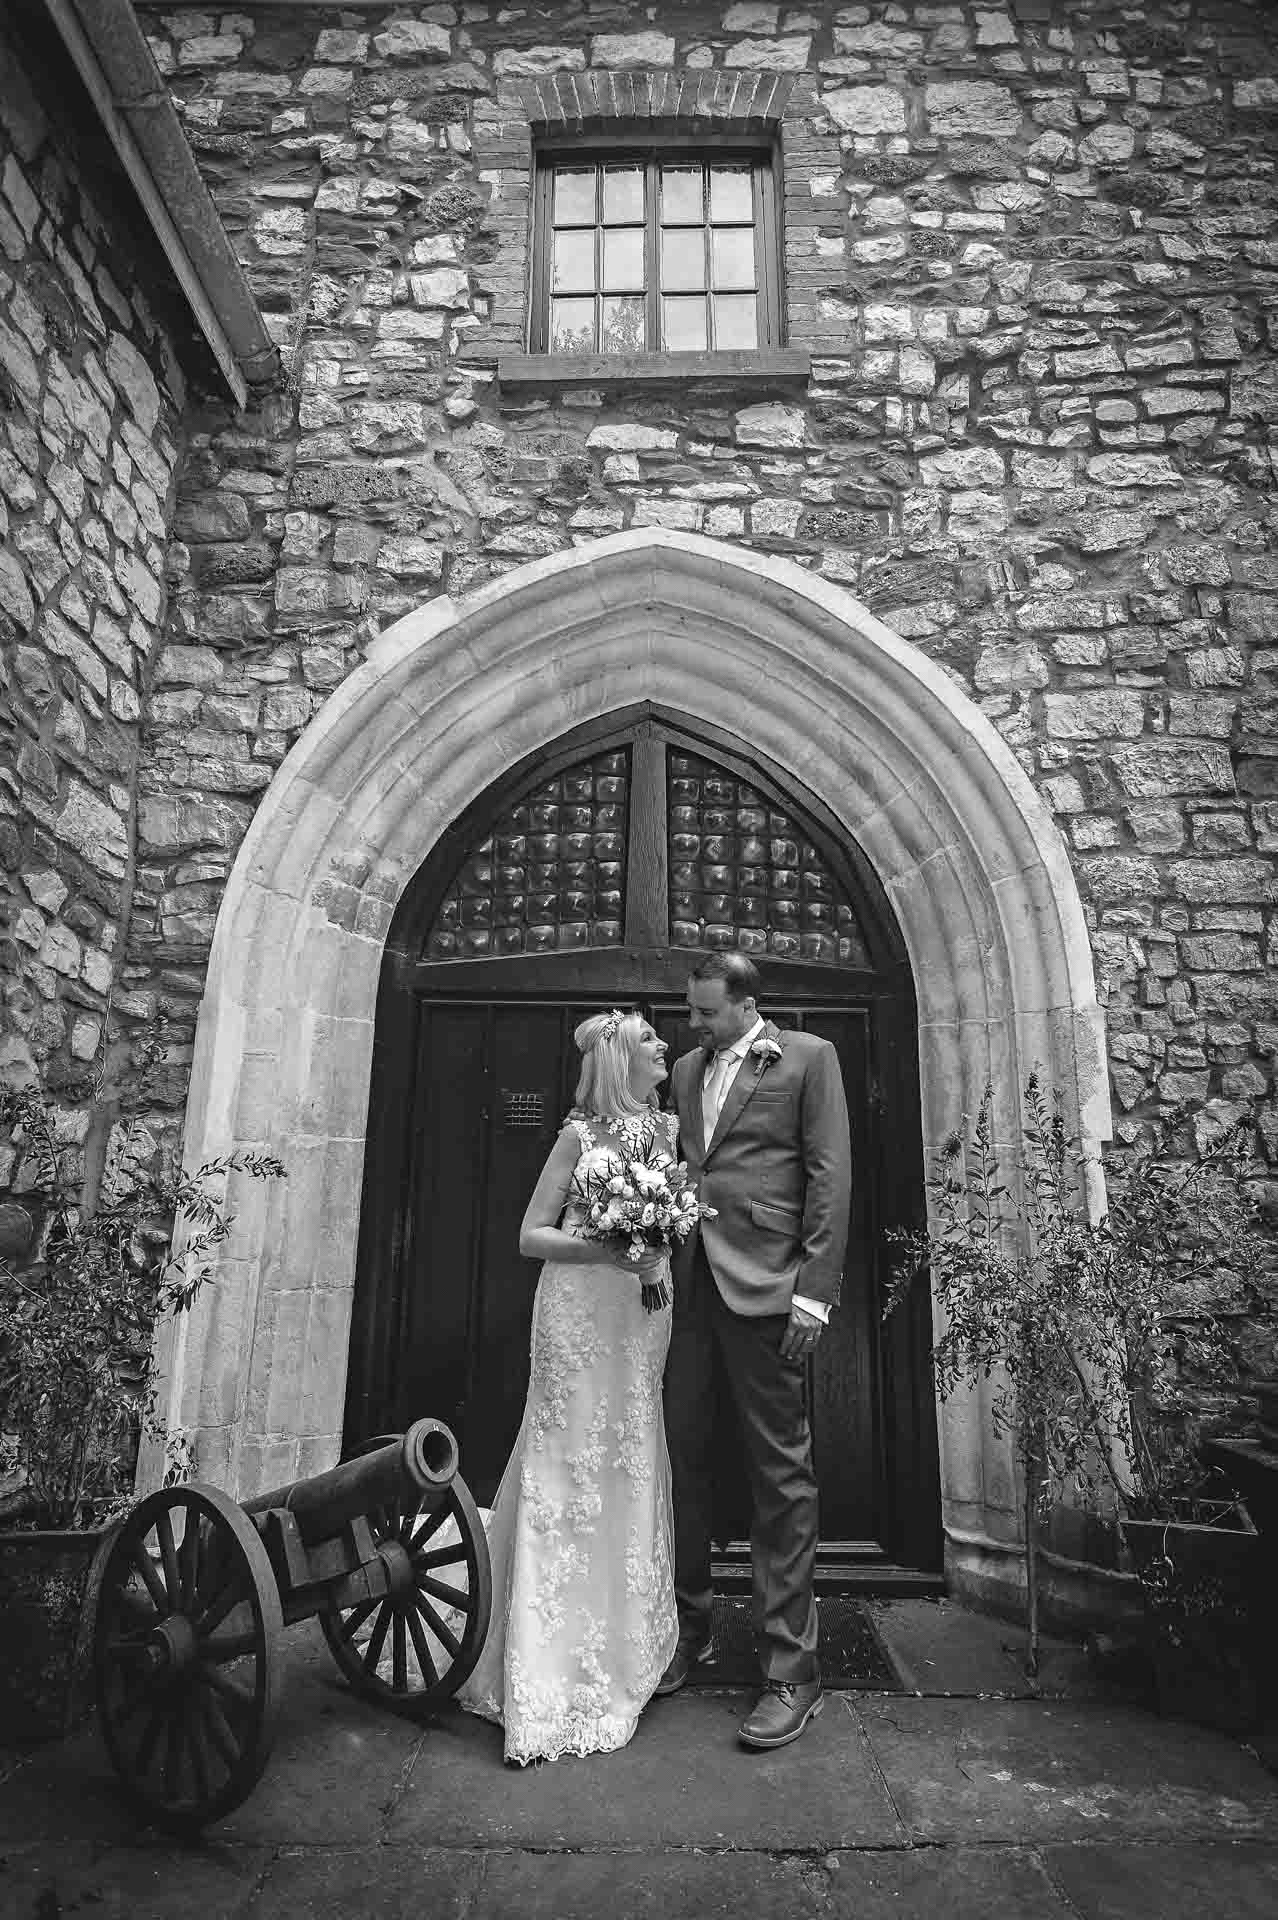 Newly-weds pose outside arched doorway at Pencoed House